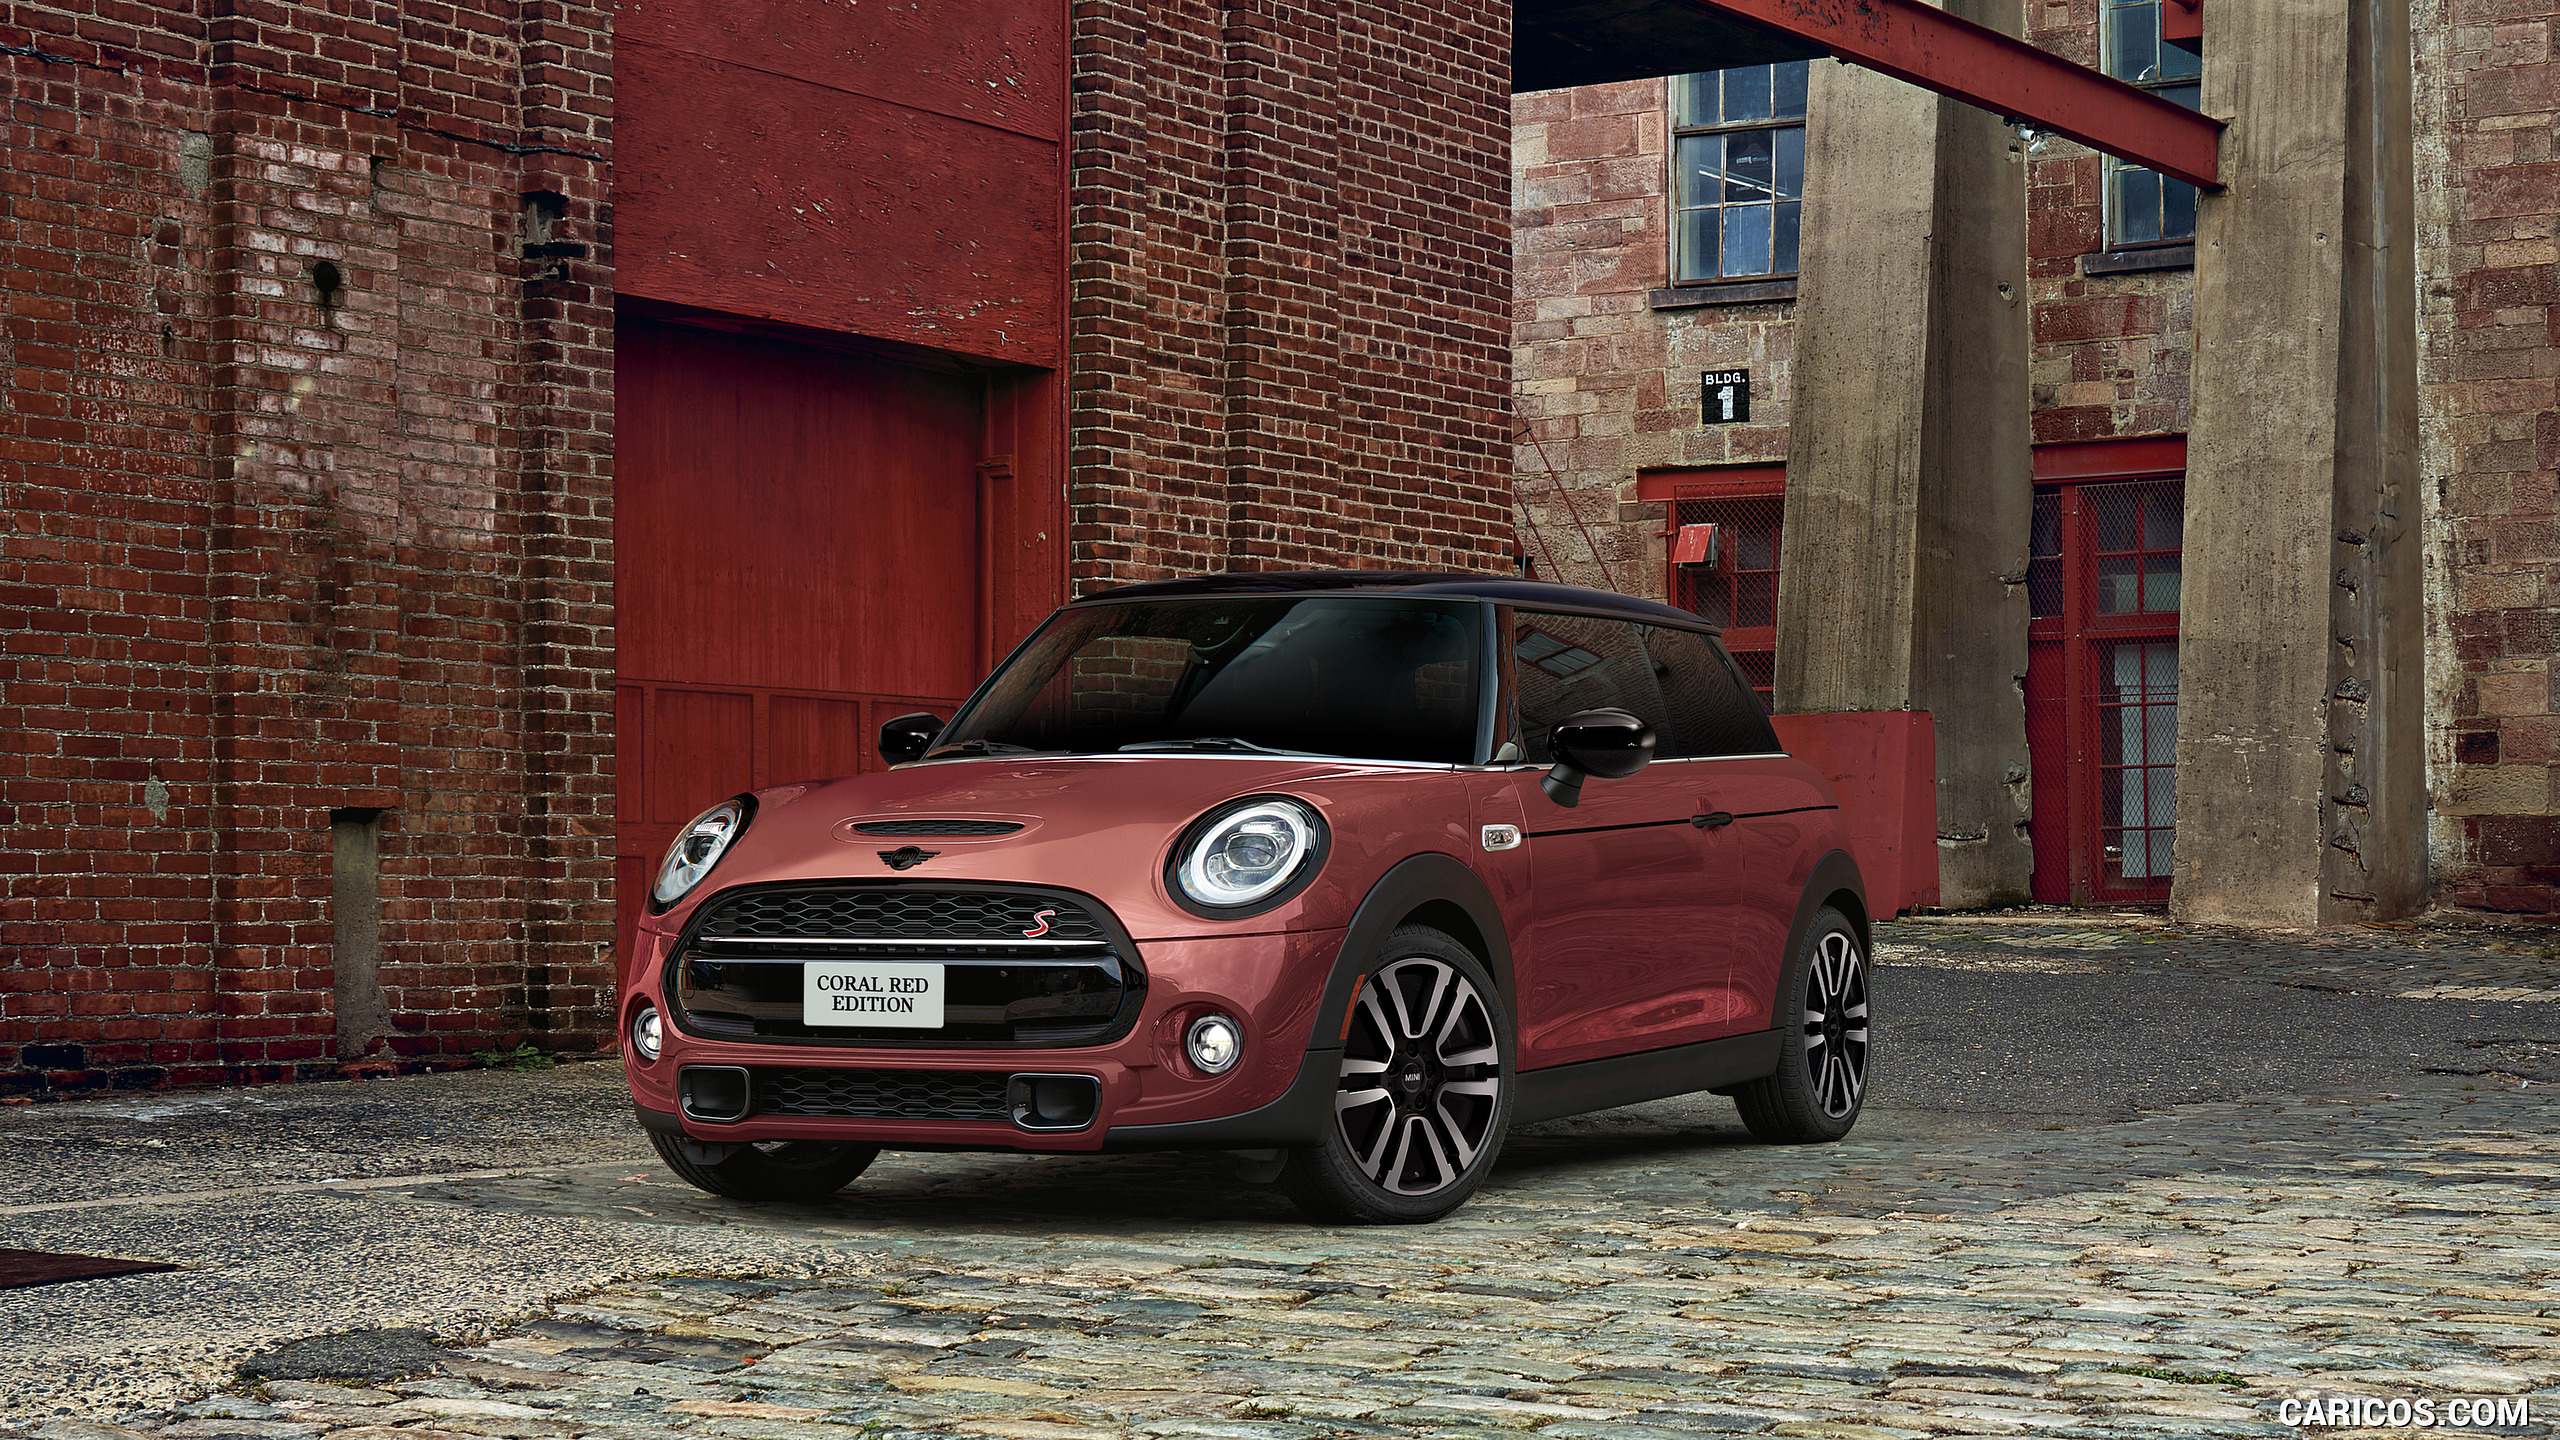 2021 MINI Coral Red Edition - Front Three-Quarter, #2 of 6